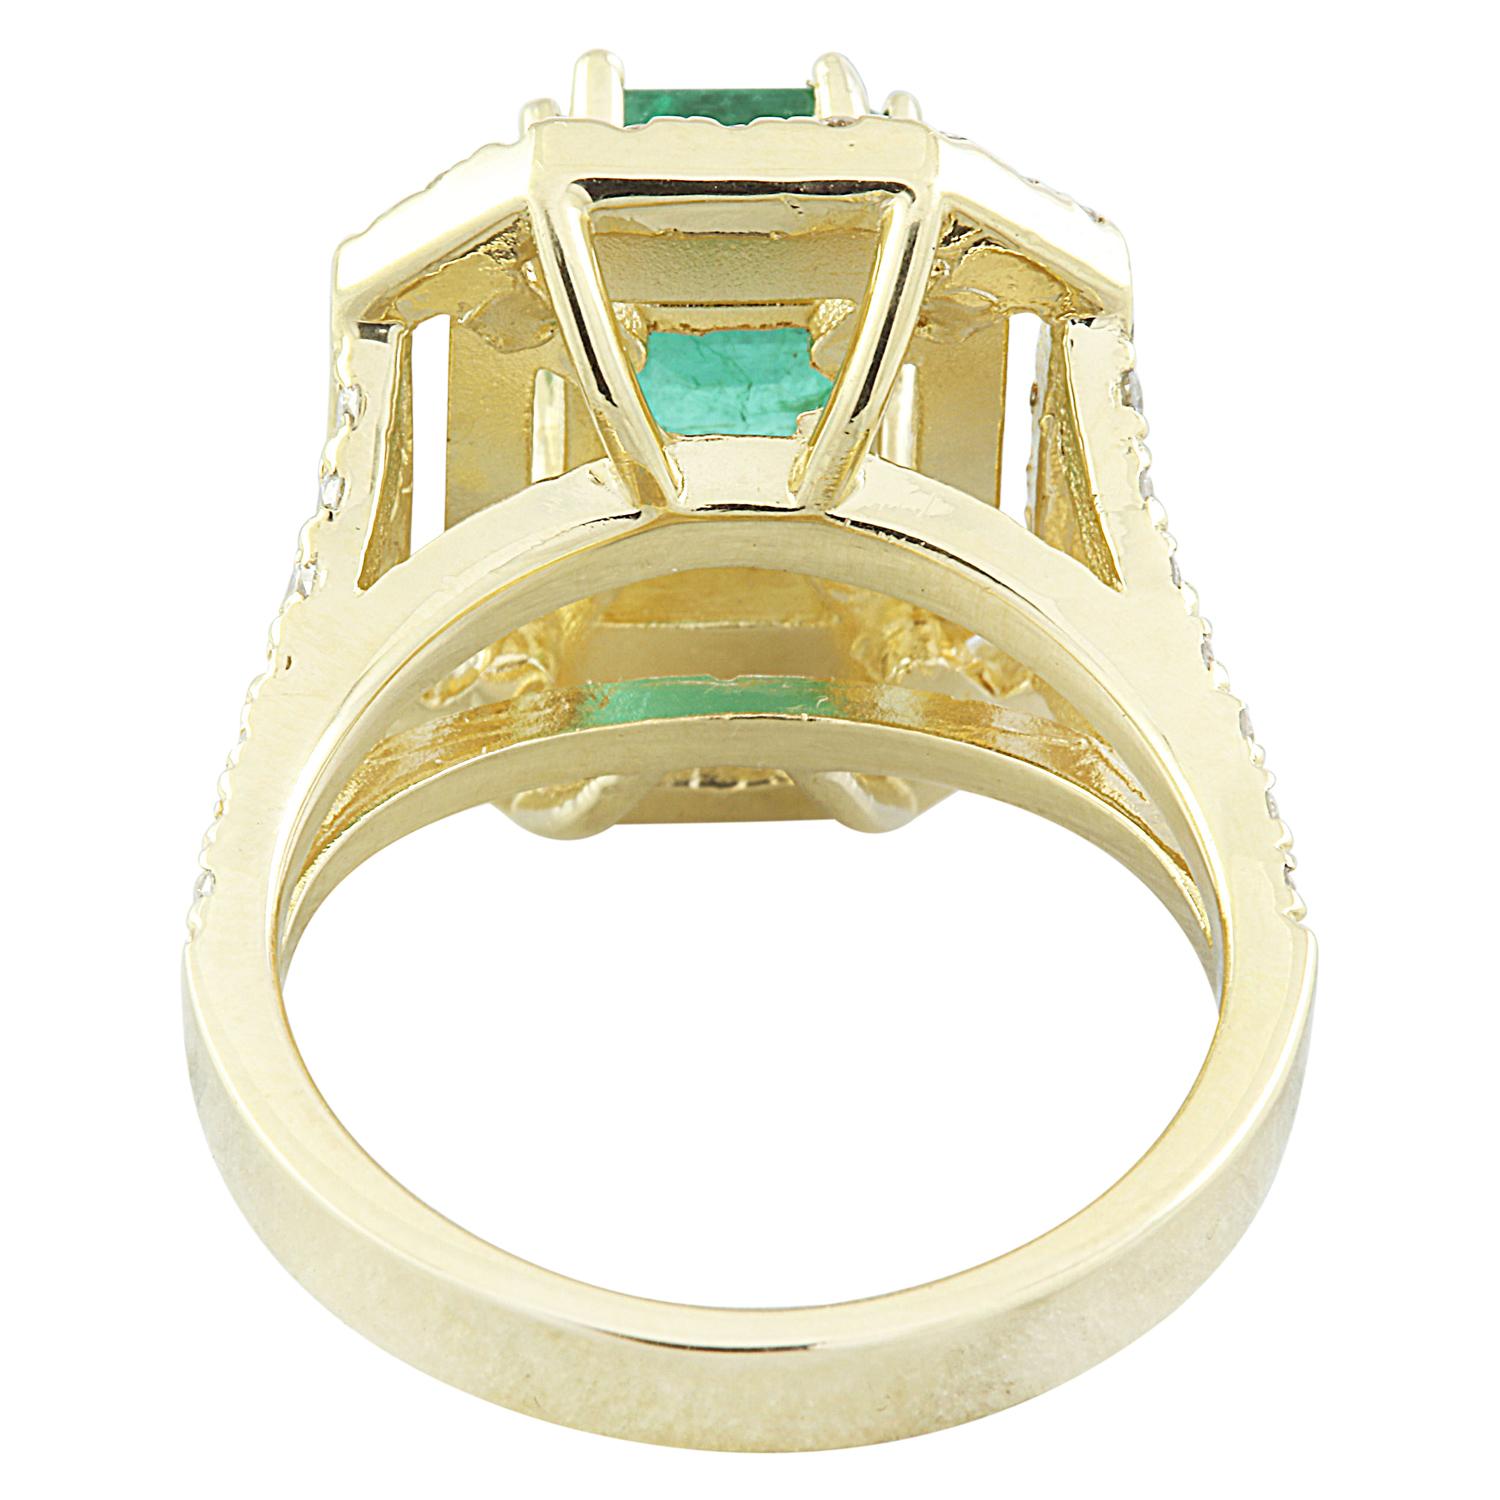 Emerald Cut Exquisite Natural Emerald Diamond Ring In 14 Karat Solid Yellow Gold  For Sale